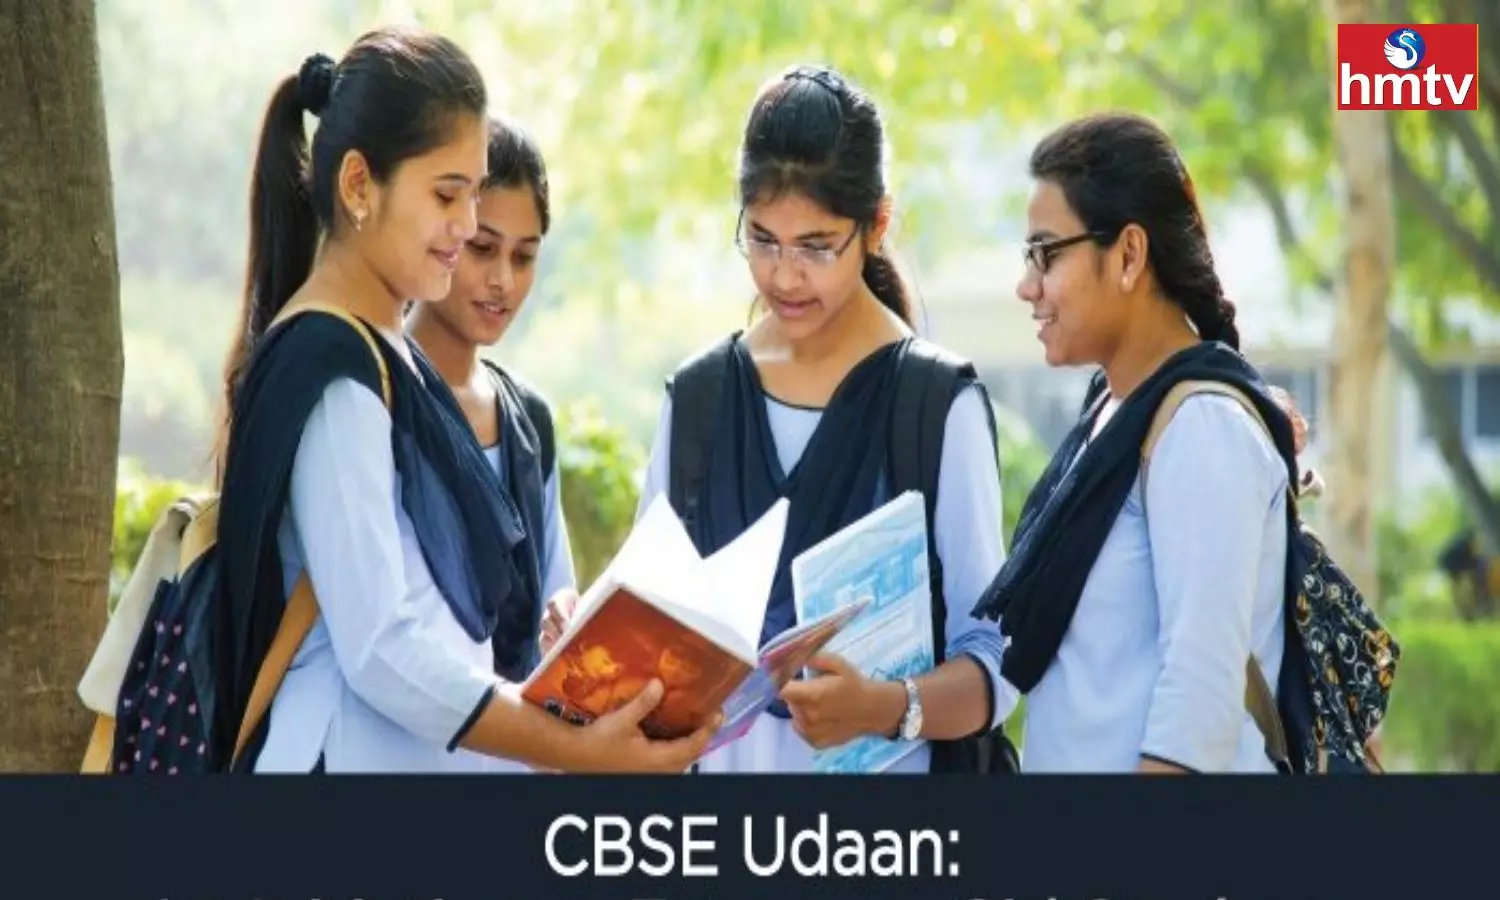 CBSE Udan Scheme Is A Boon For Girls Free Help To Do Technical Courses